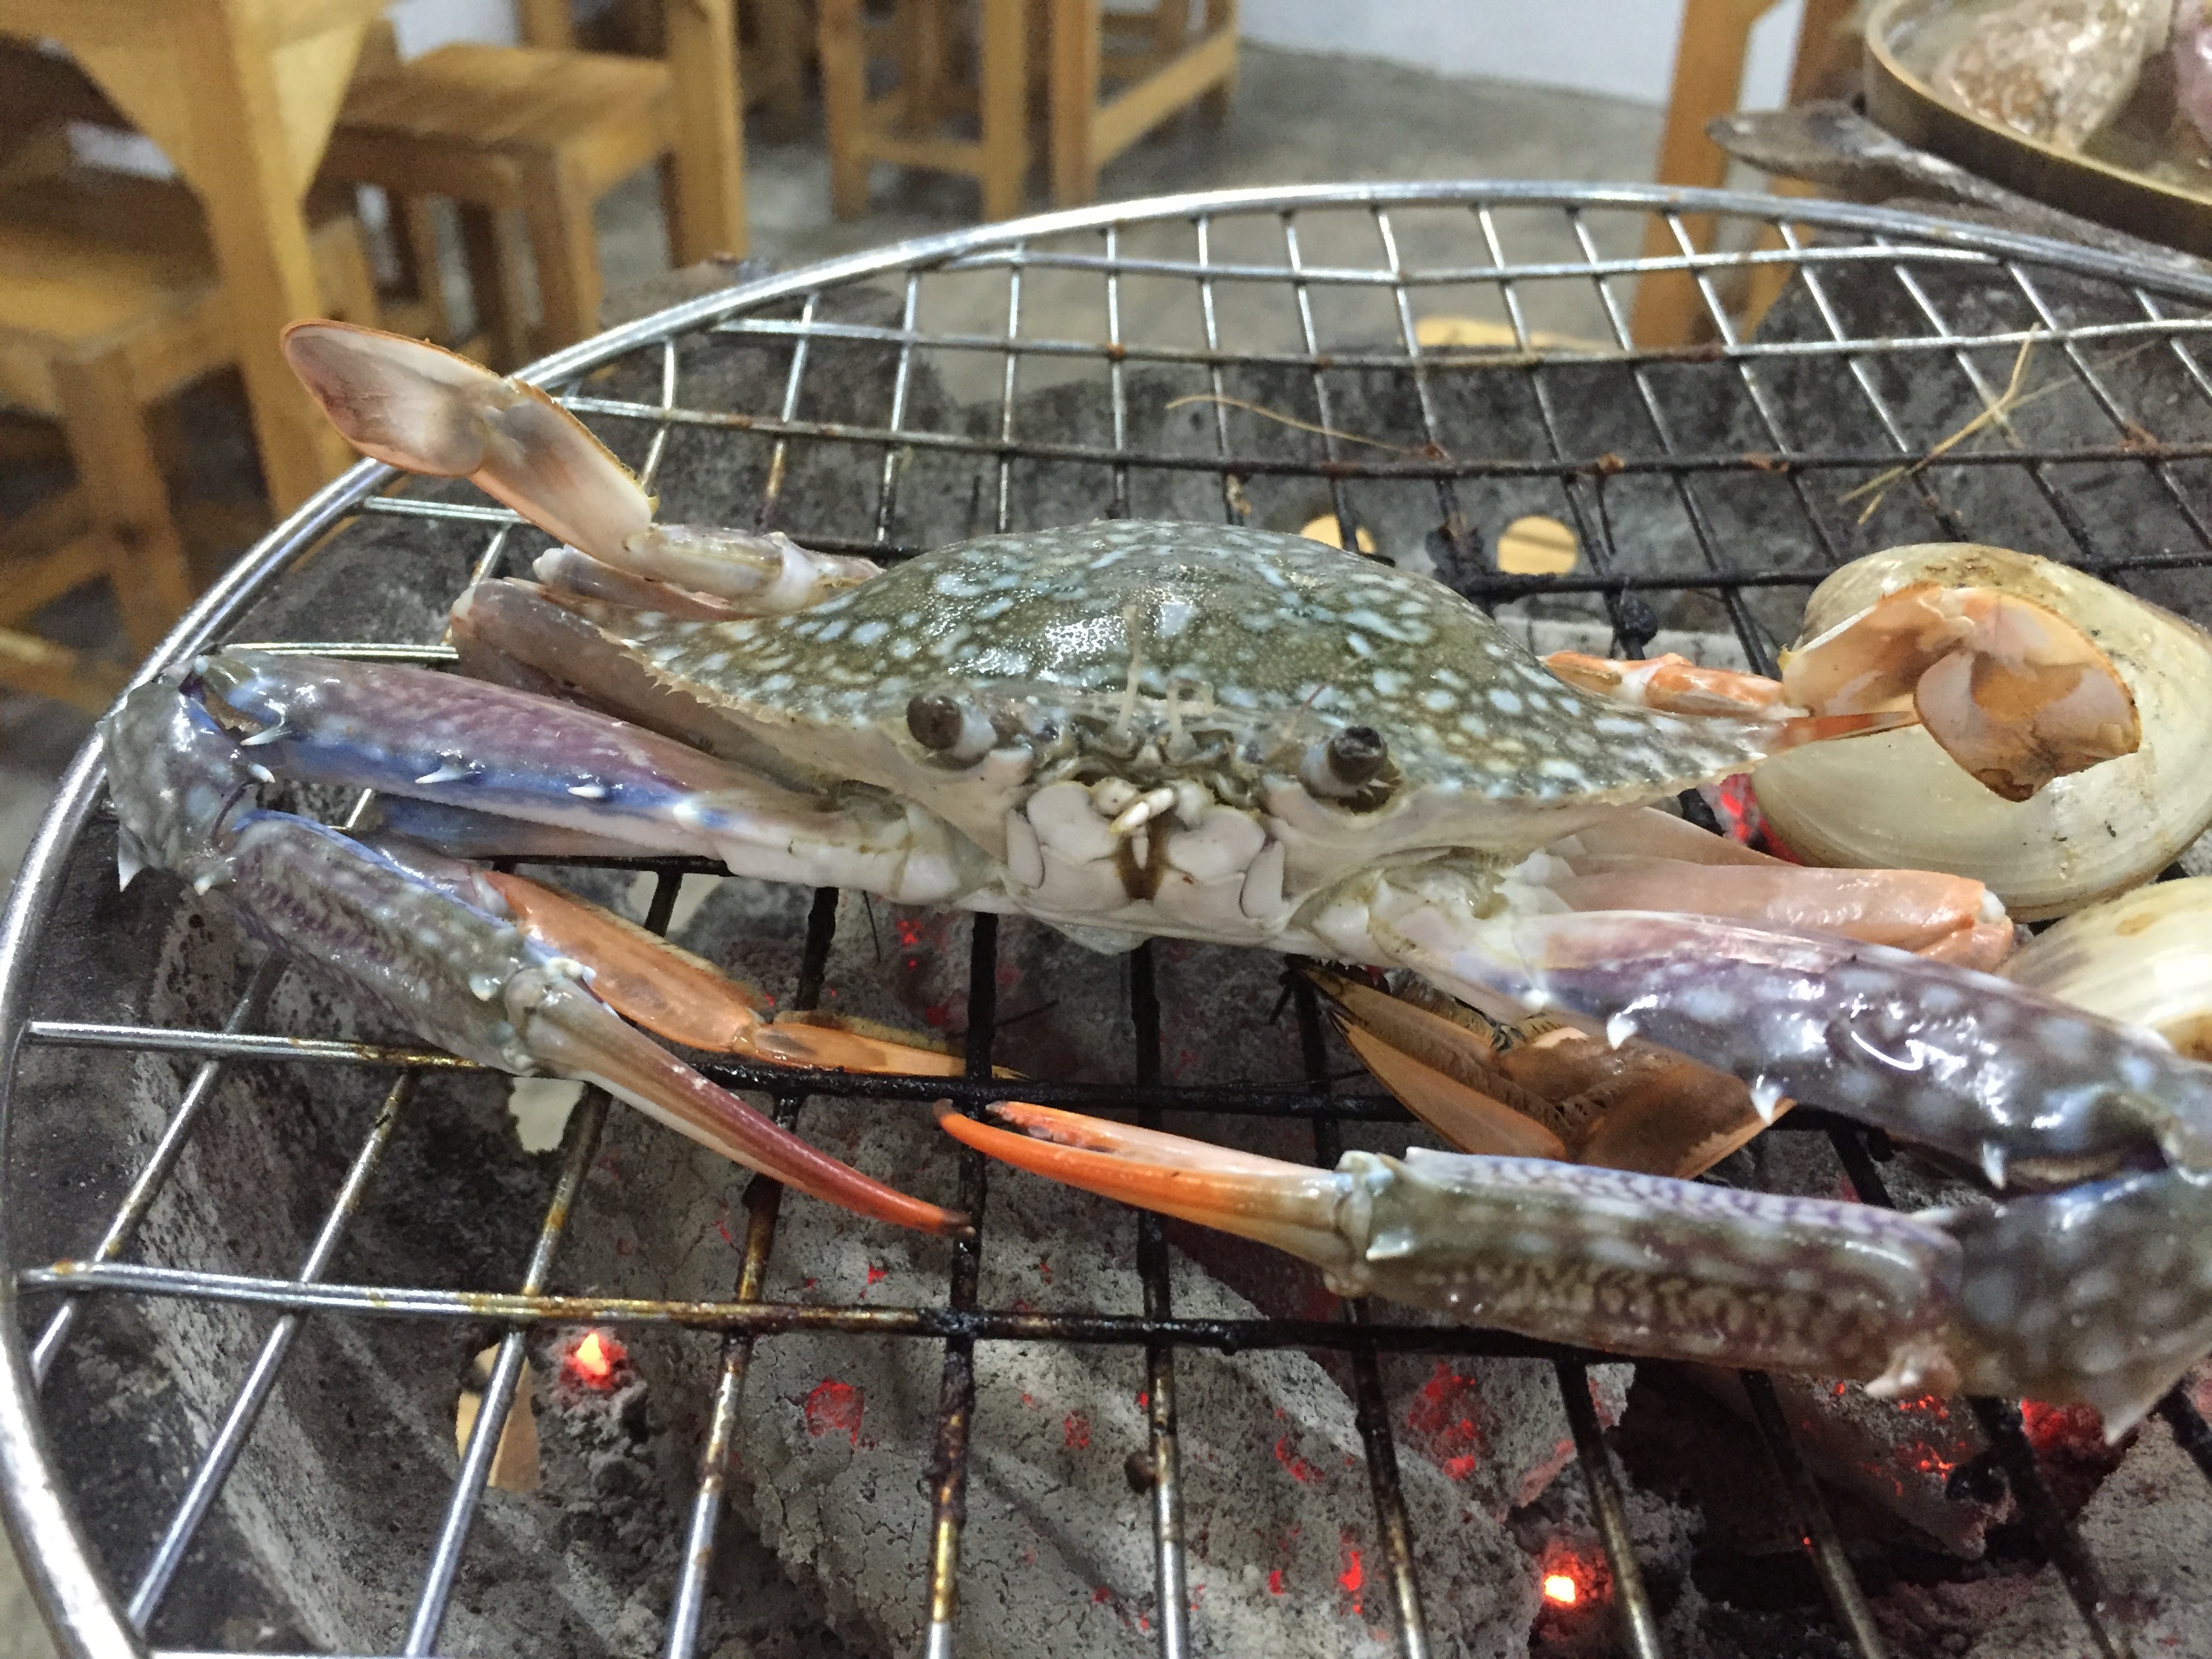 All You Can Eat Seafood, BBQ and Beer in Huay Kwang, Bangkok